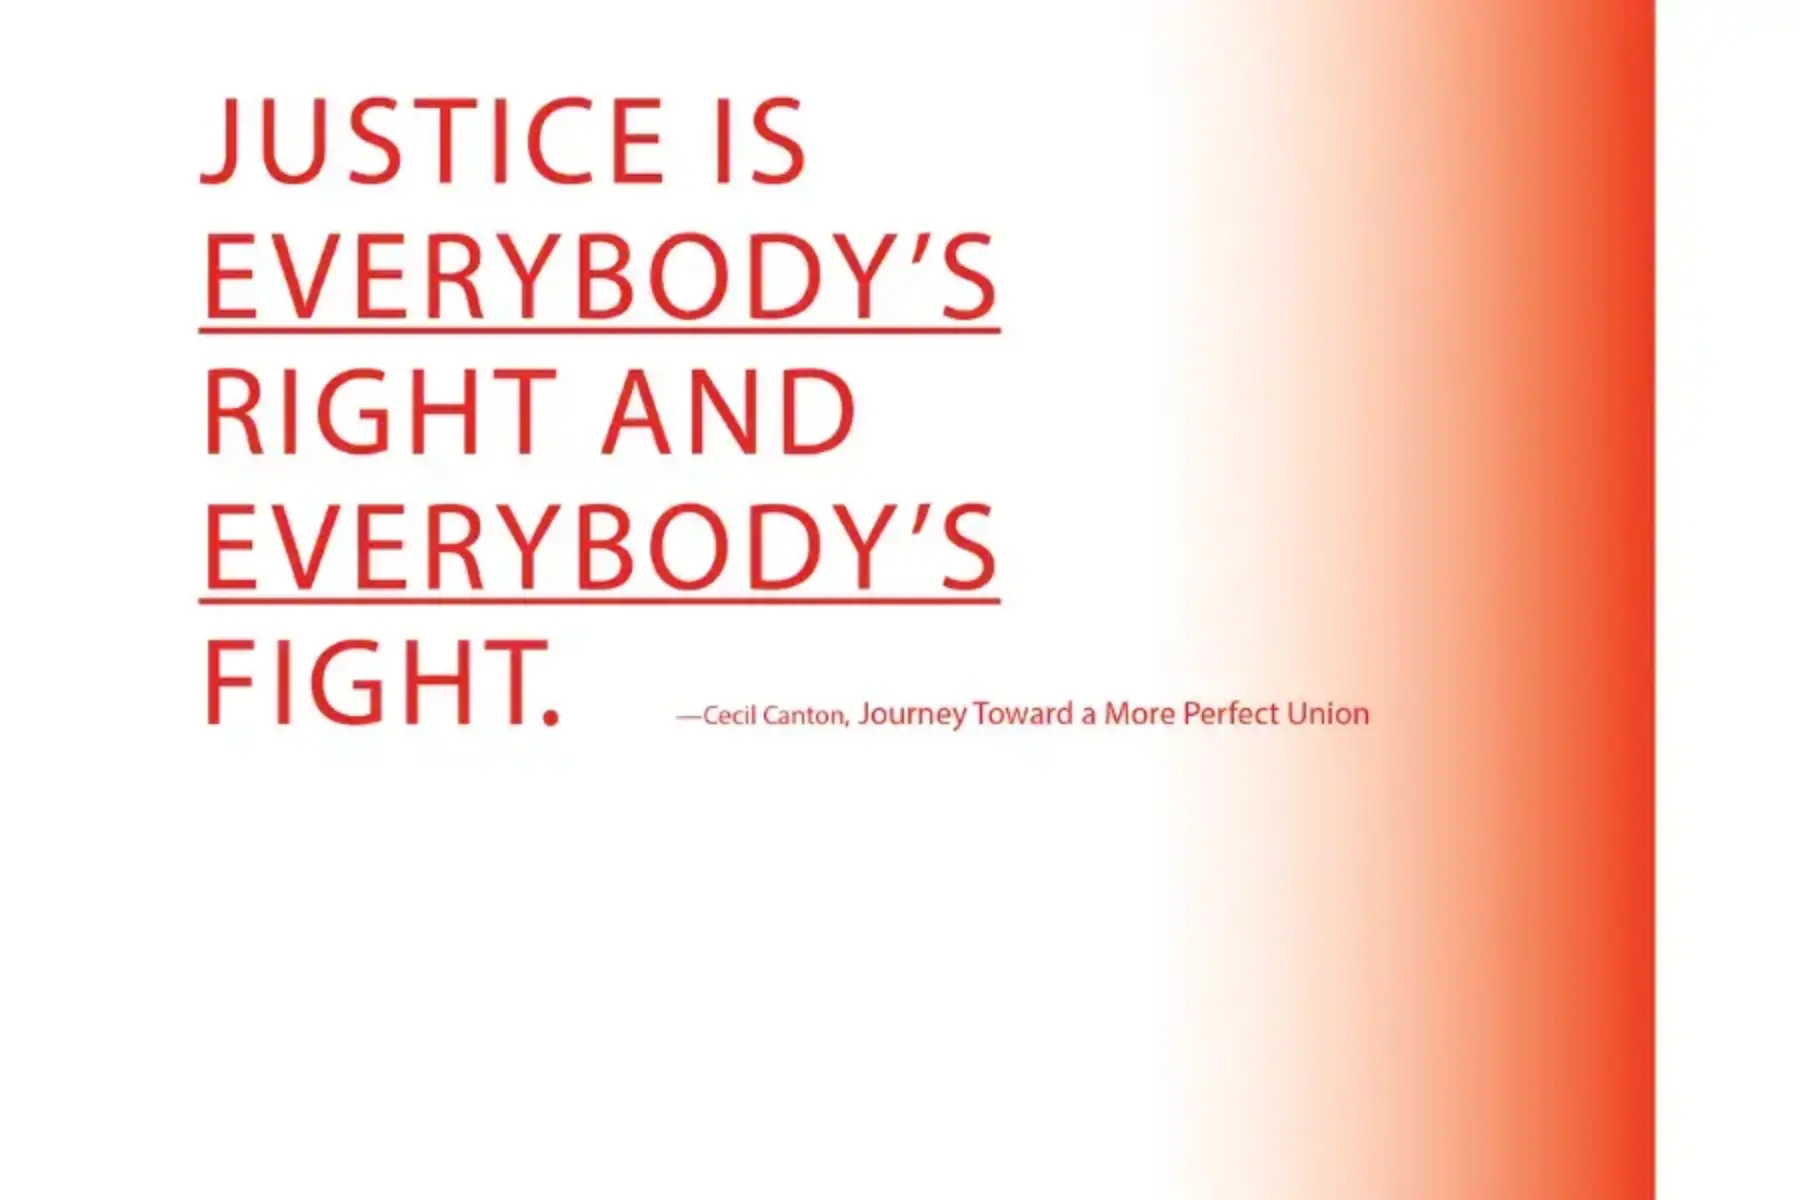 Back cover of chapbook. White background with red fad to the right. Large, uppercase red text reads justice is everybody's right and everybody's fight. - Cecil Canton, Journey Toward a More Perfect Union